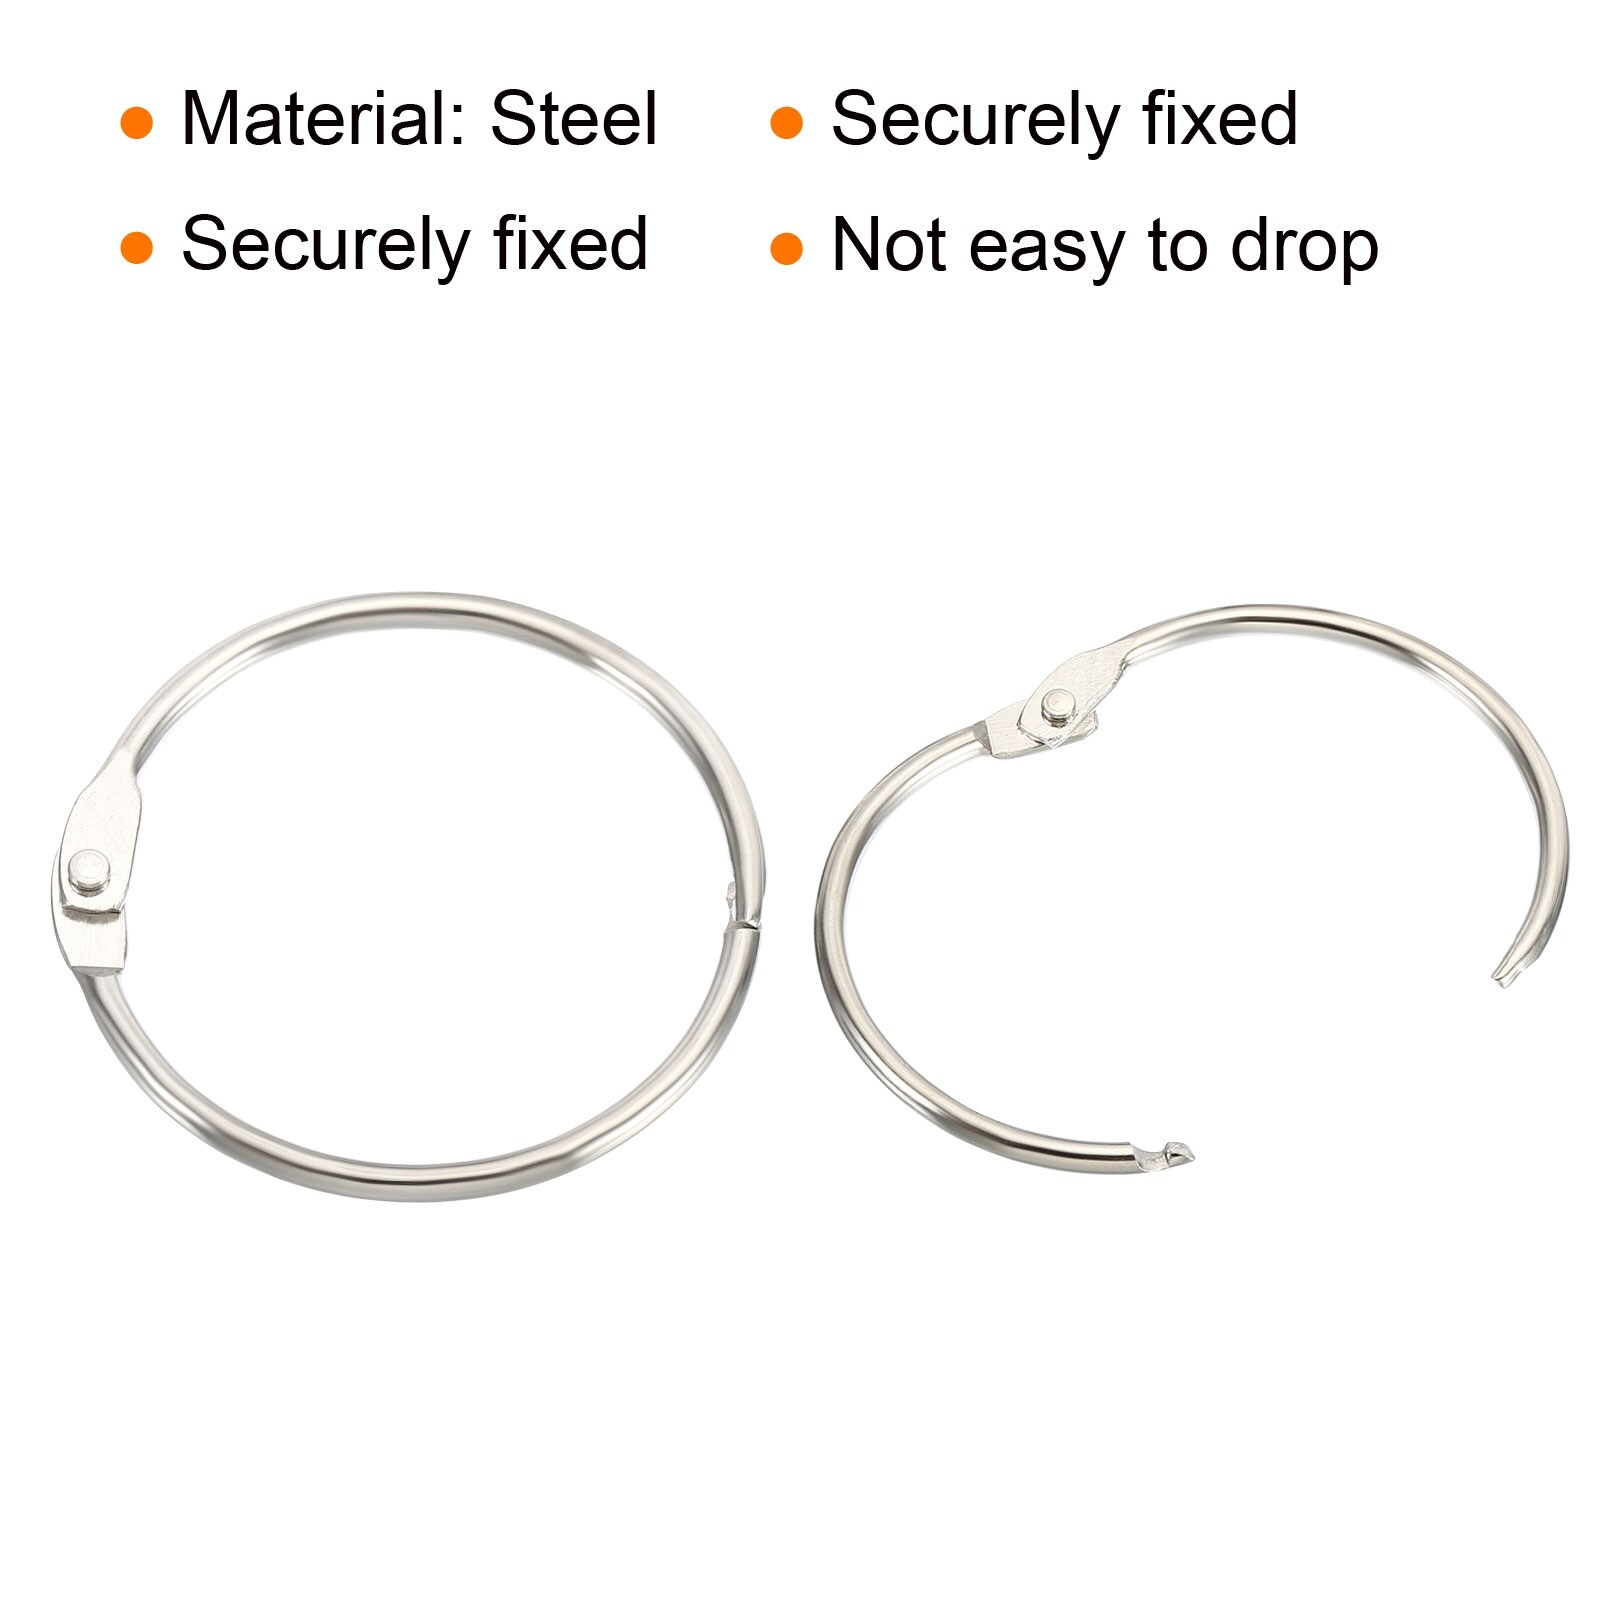 Metal O Ring 48mm(1.89) ID 4.8mm Thickness Iron Rings for DIY